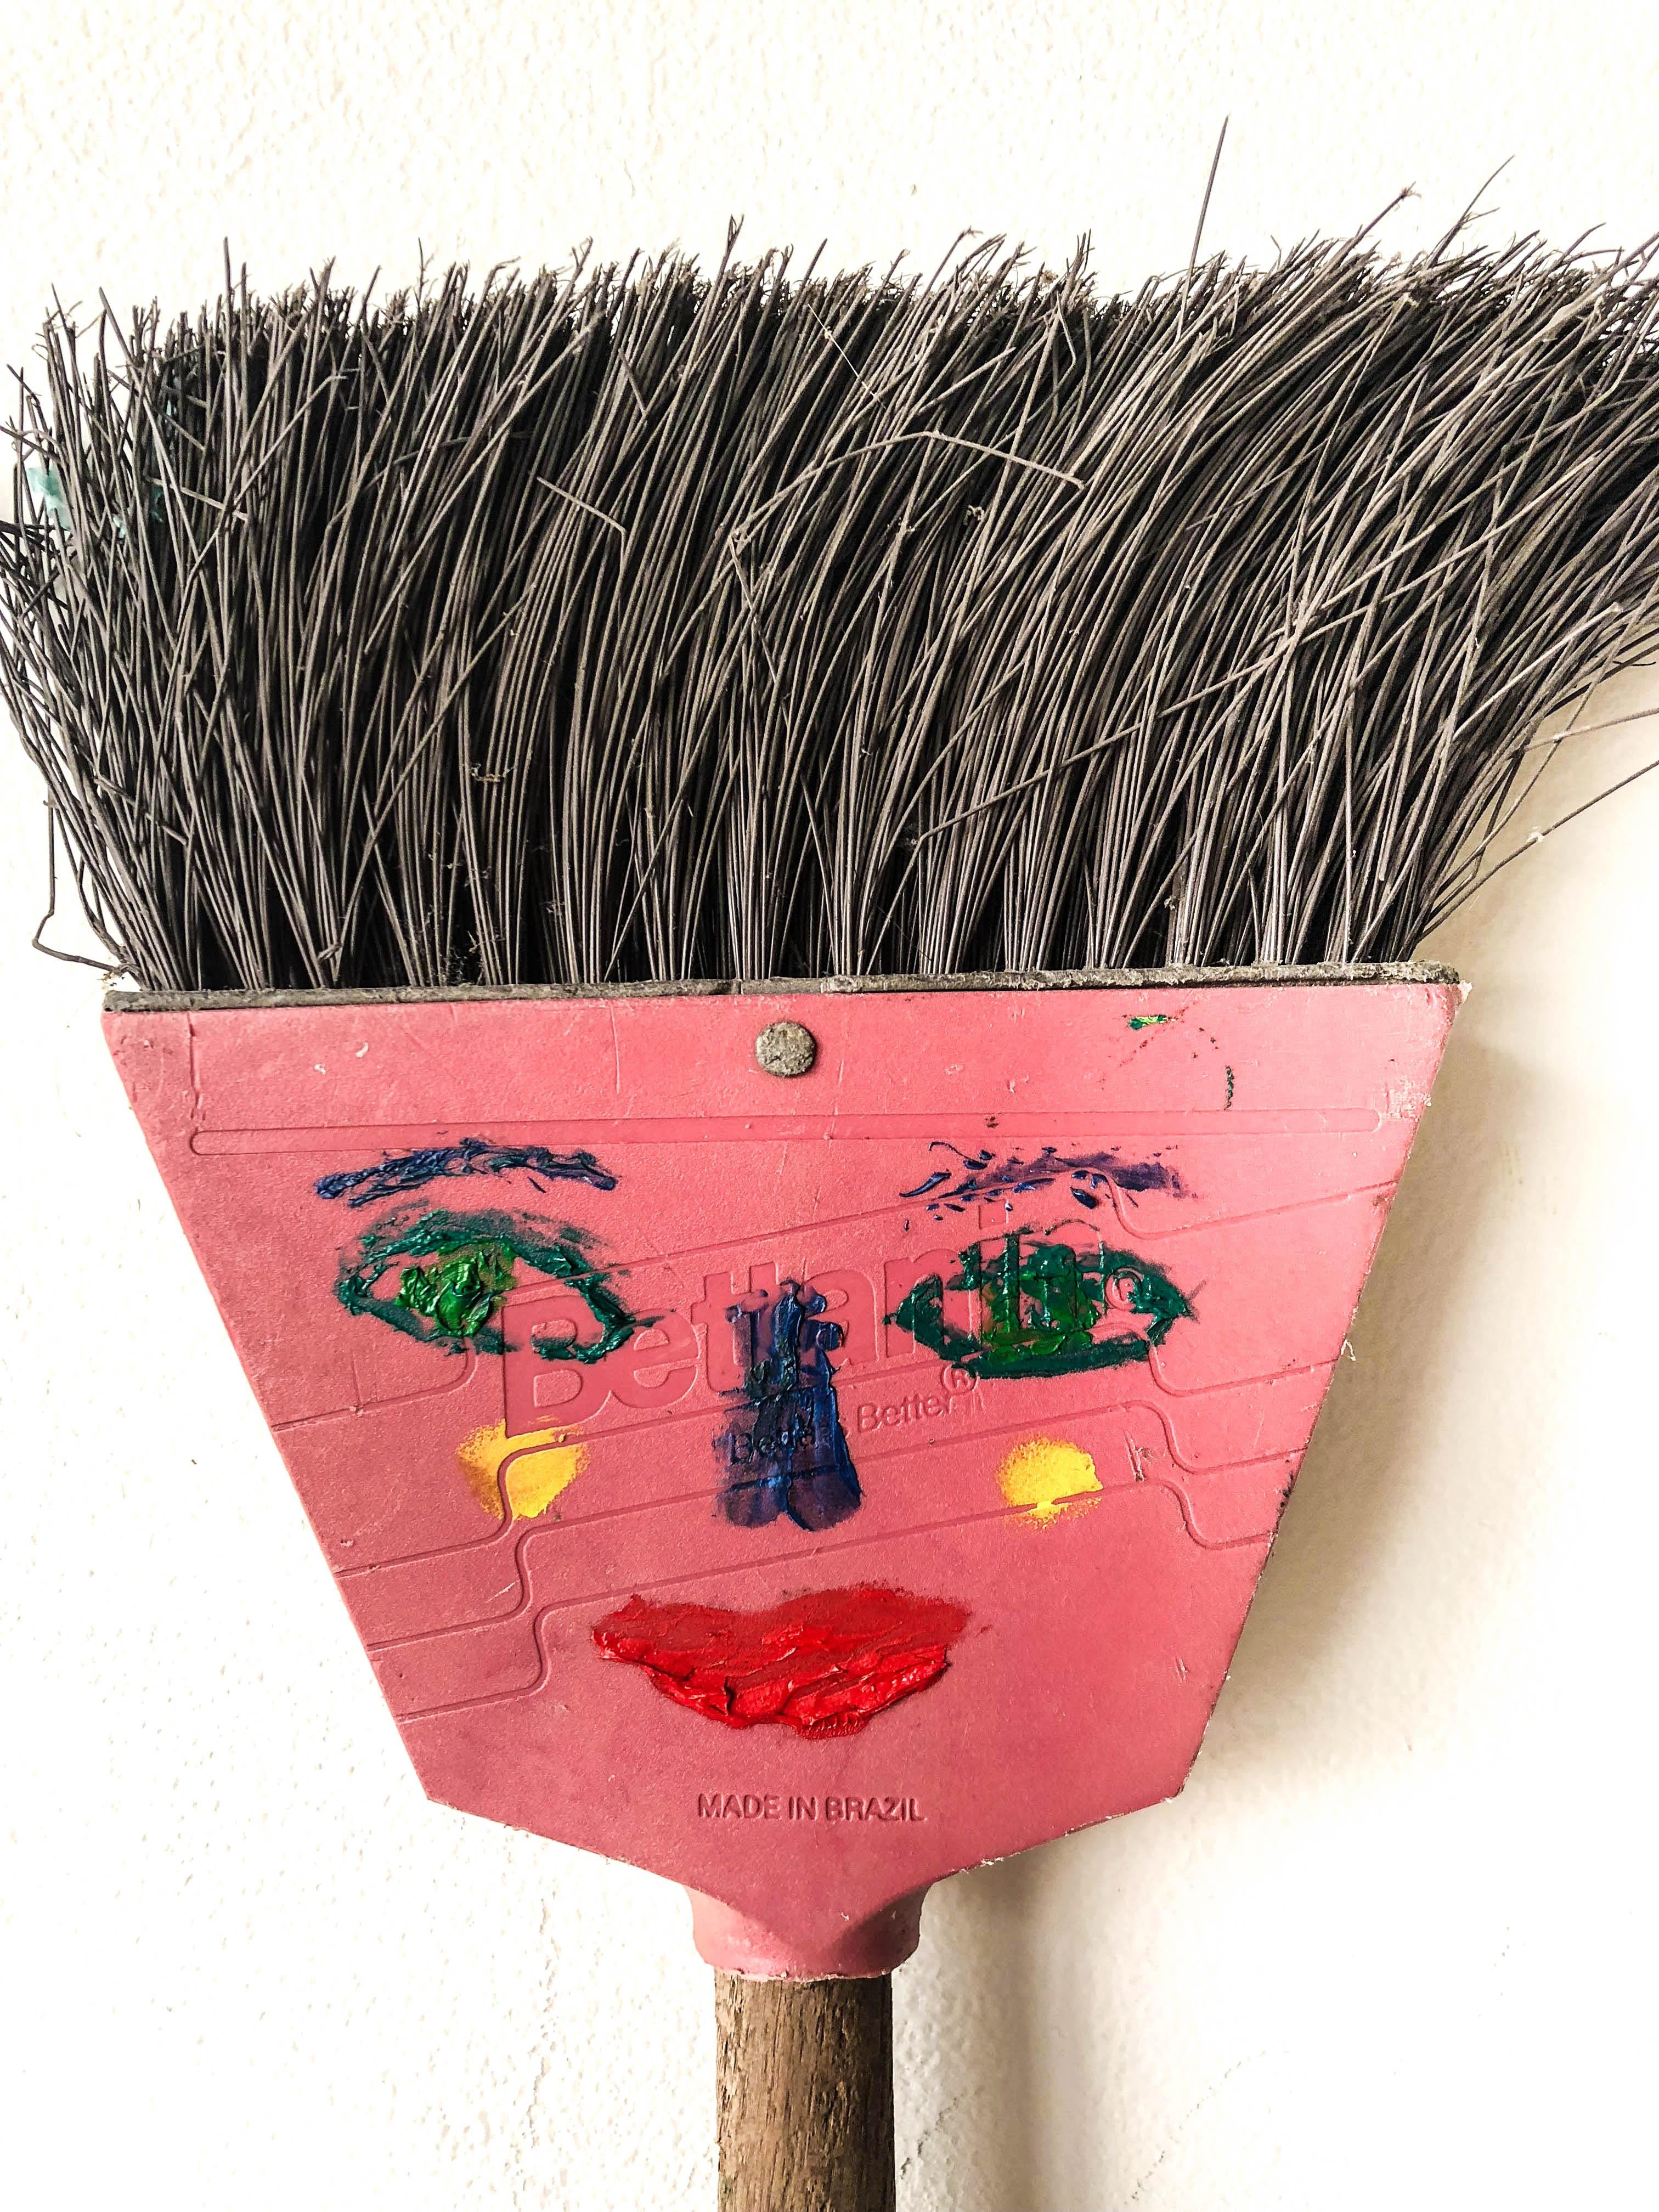 Bettanin Broom Woman with Found Objects//Folk Art - Sculpture by Rick Borg